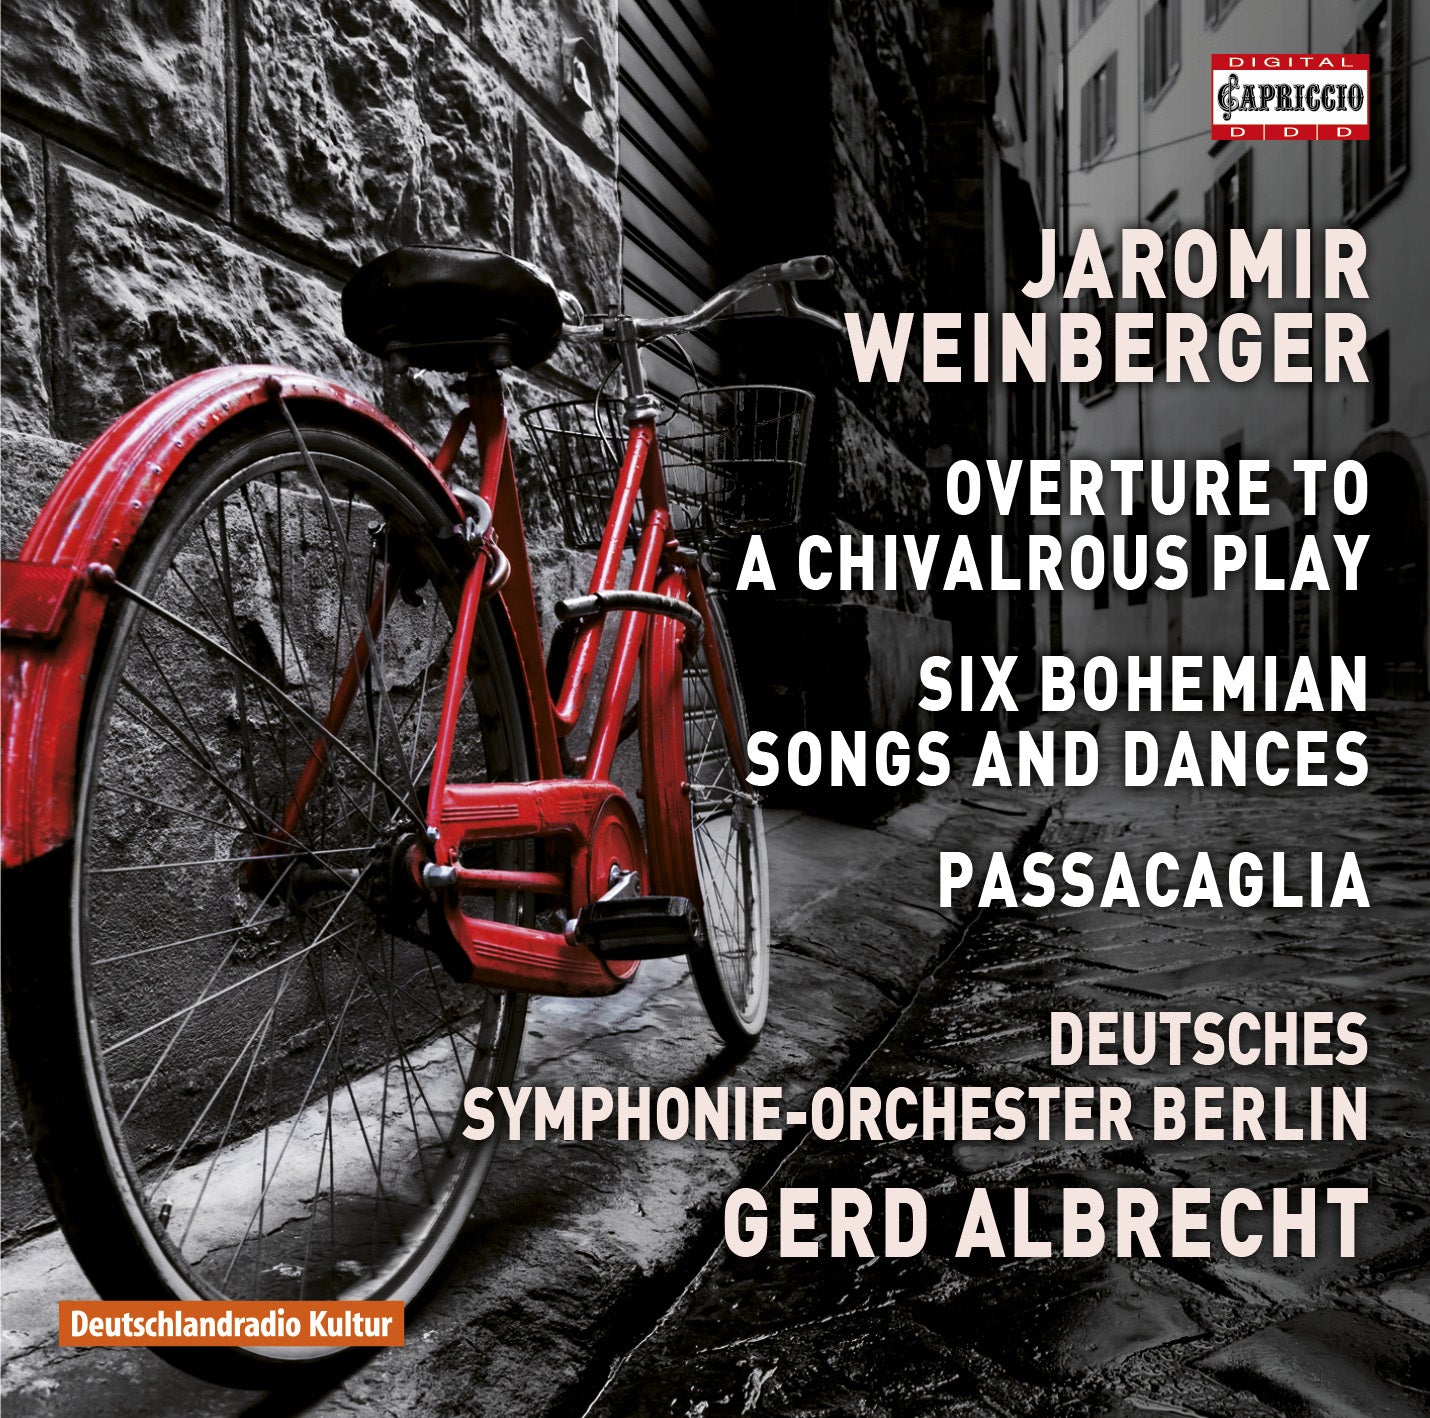 Weinberger: Overture to a Chivalrous Play, 6 Bohemian Songs & Dances & Passacaglia / Albrecht